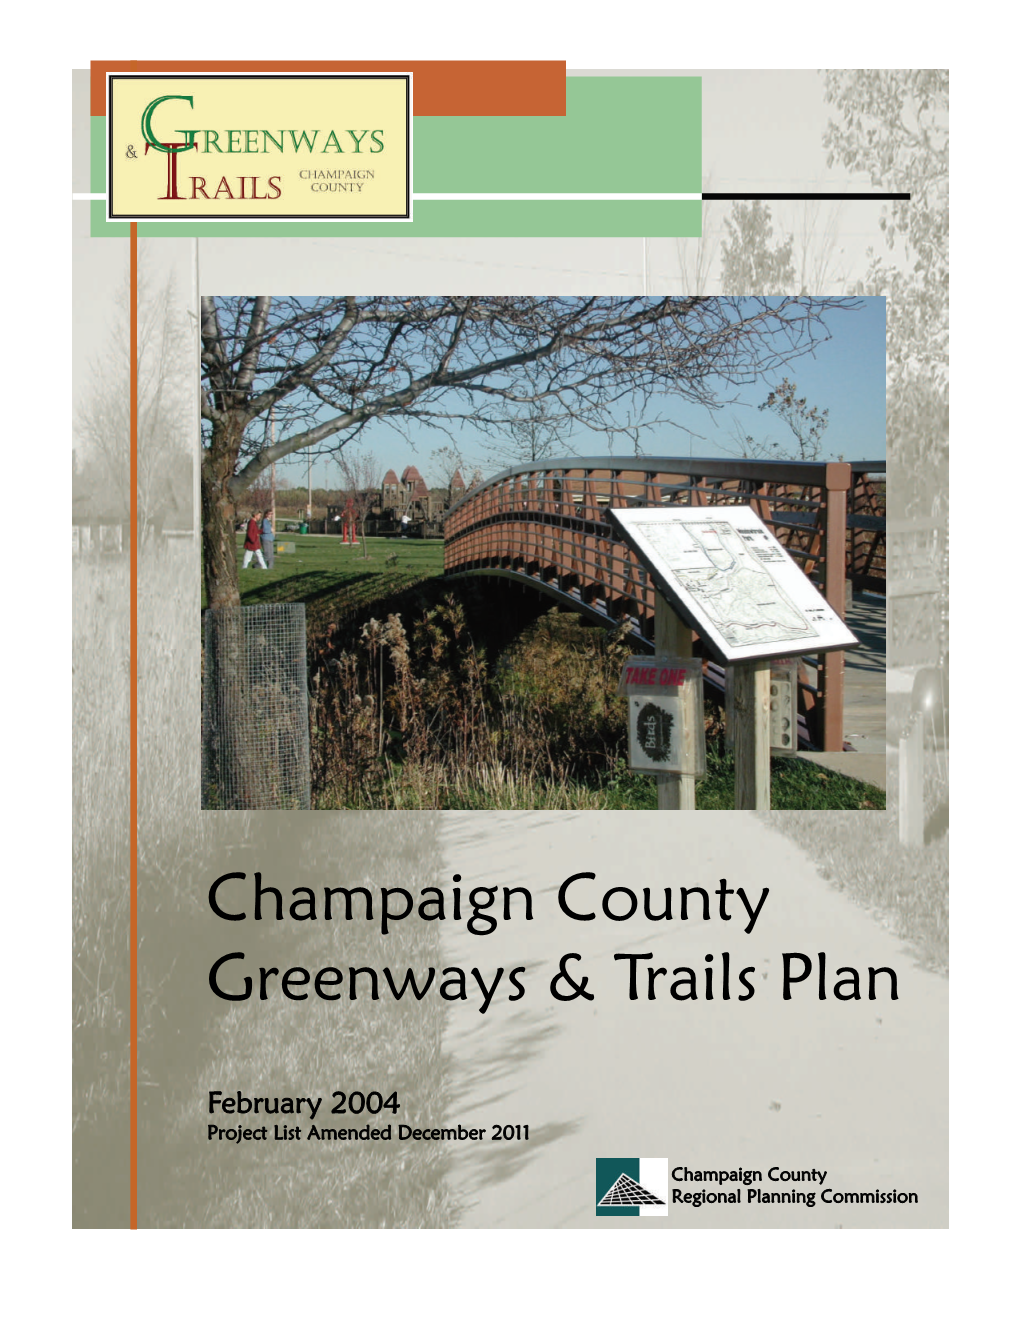 2004 Champaign County Greenways & Trails Plan